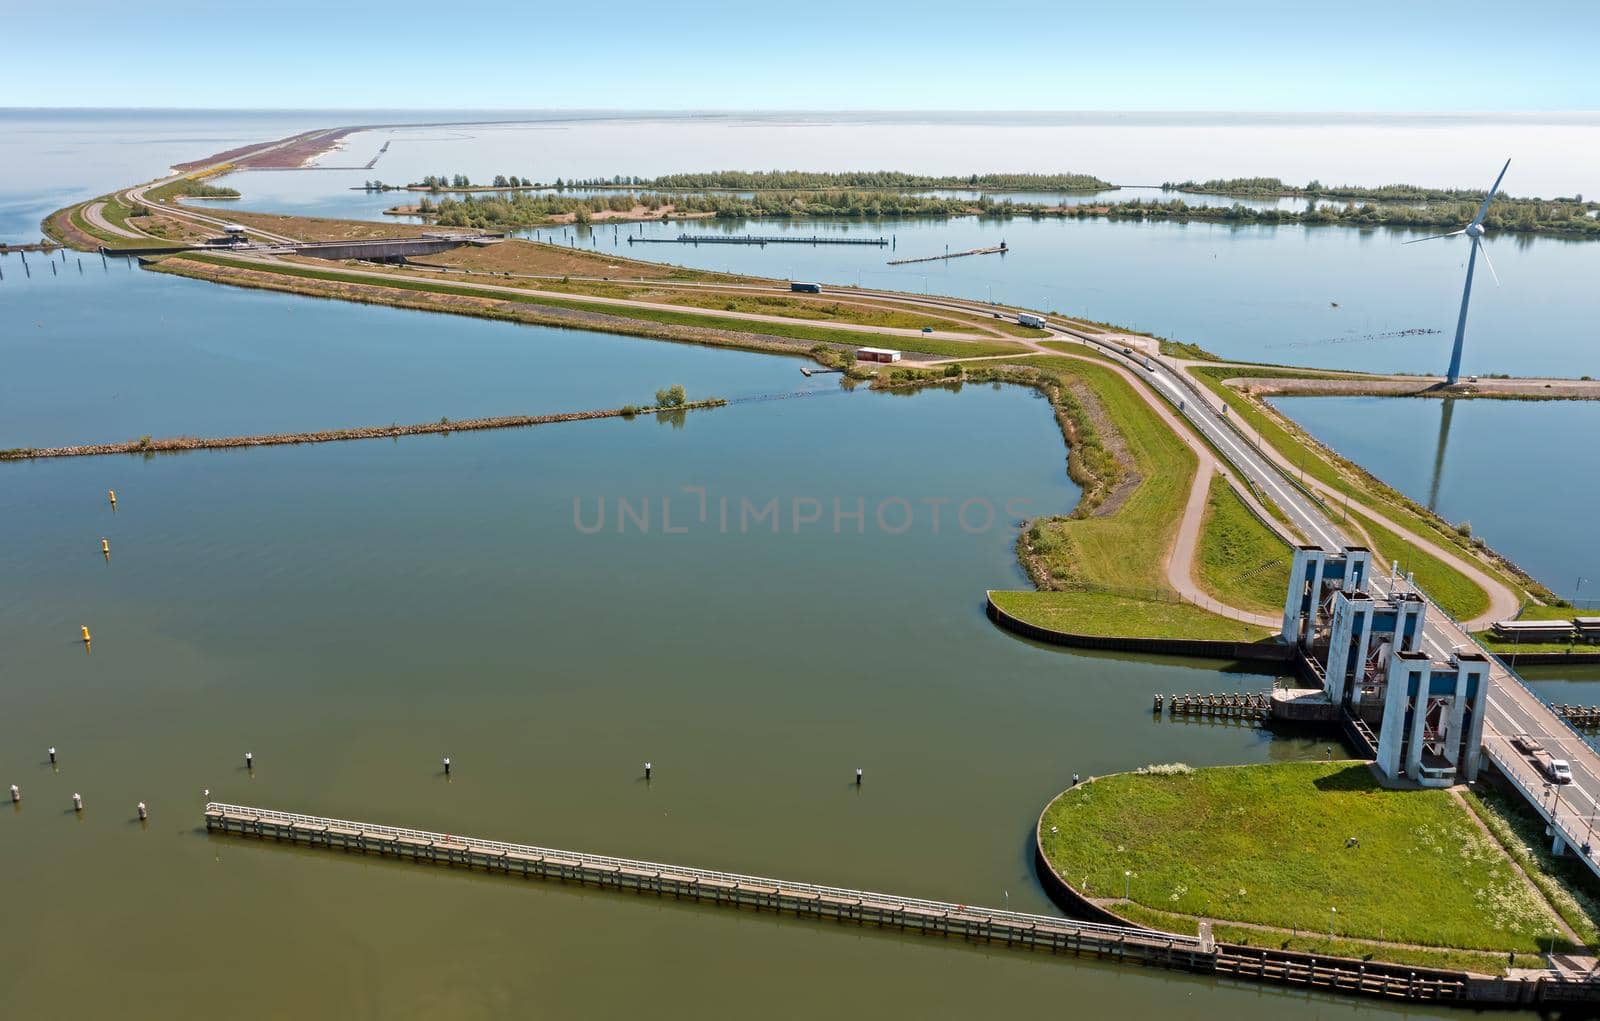 Aerial from the Krabbersgat sluices near Enkhuizen in the Netherlands by devy